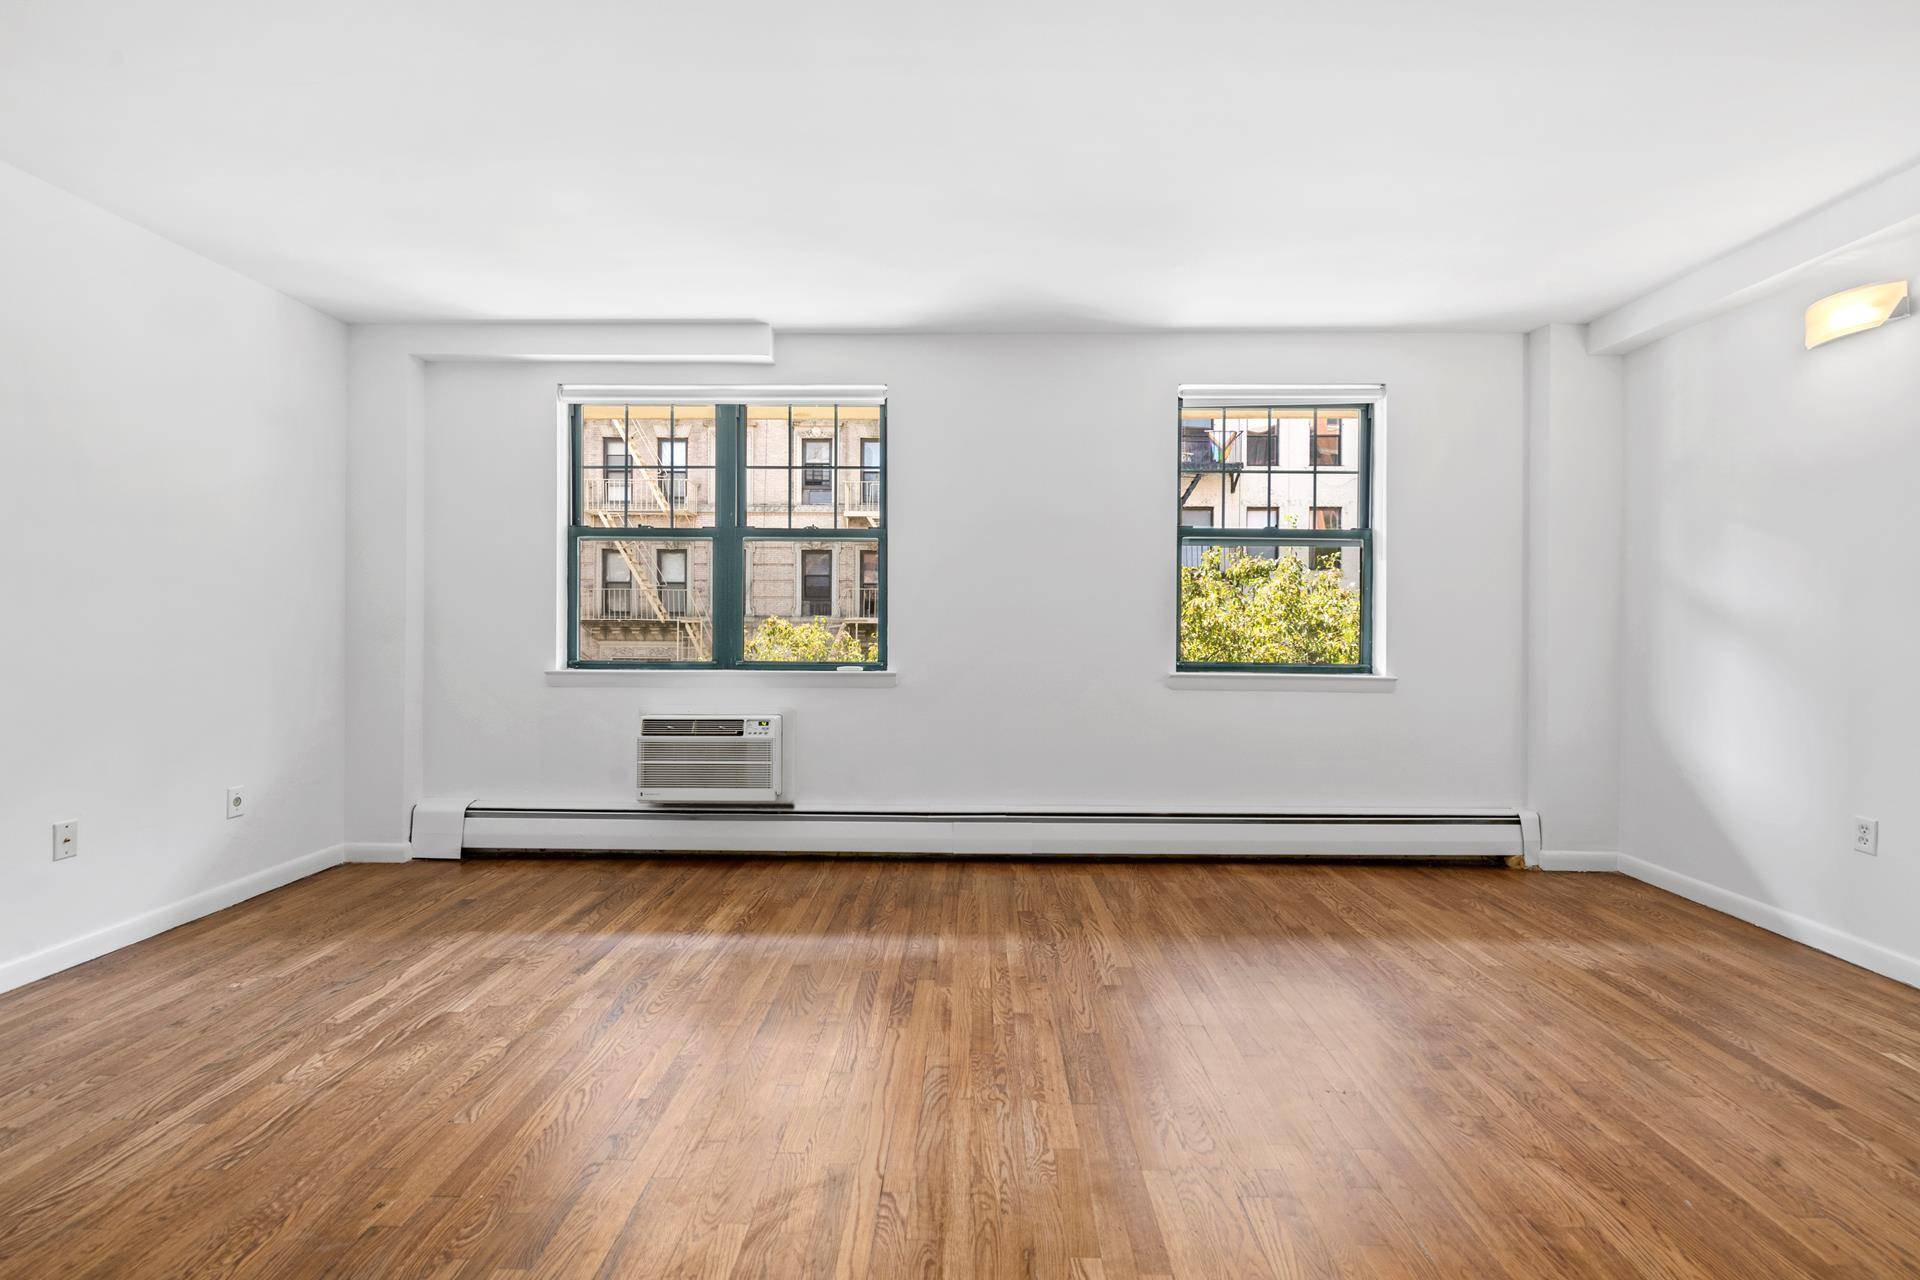 Experience the vibrancy of the East Village in this unique, newly renovated duplex condo featuring two large bedrooms and one and a half bathrooms.